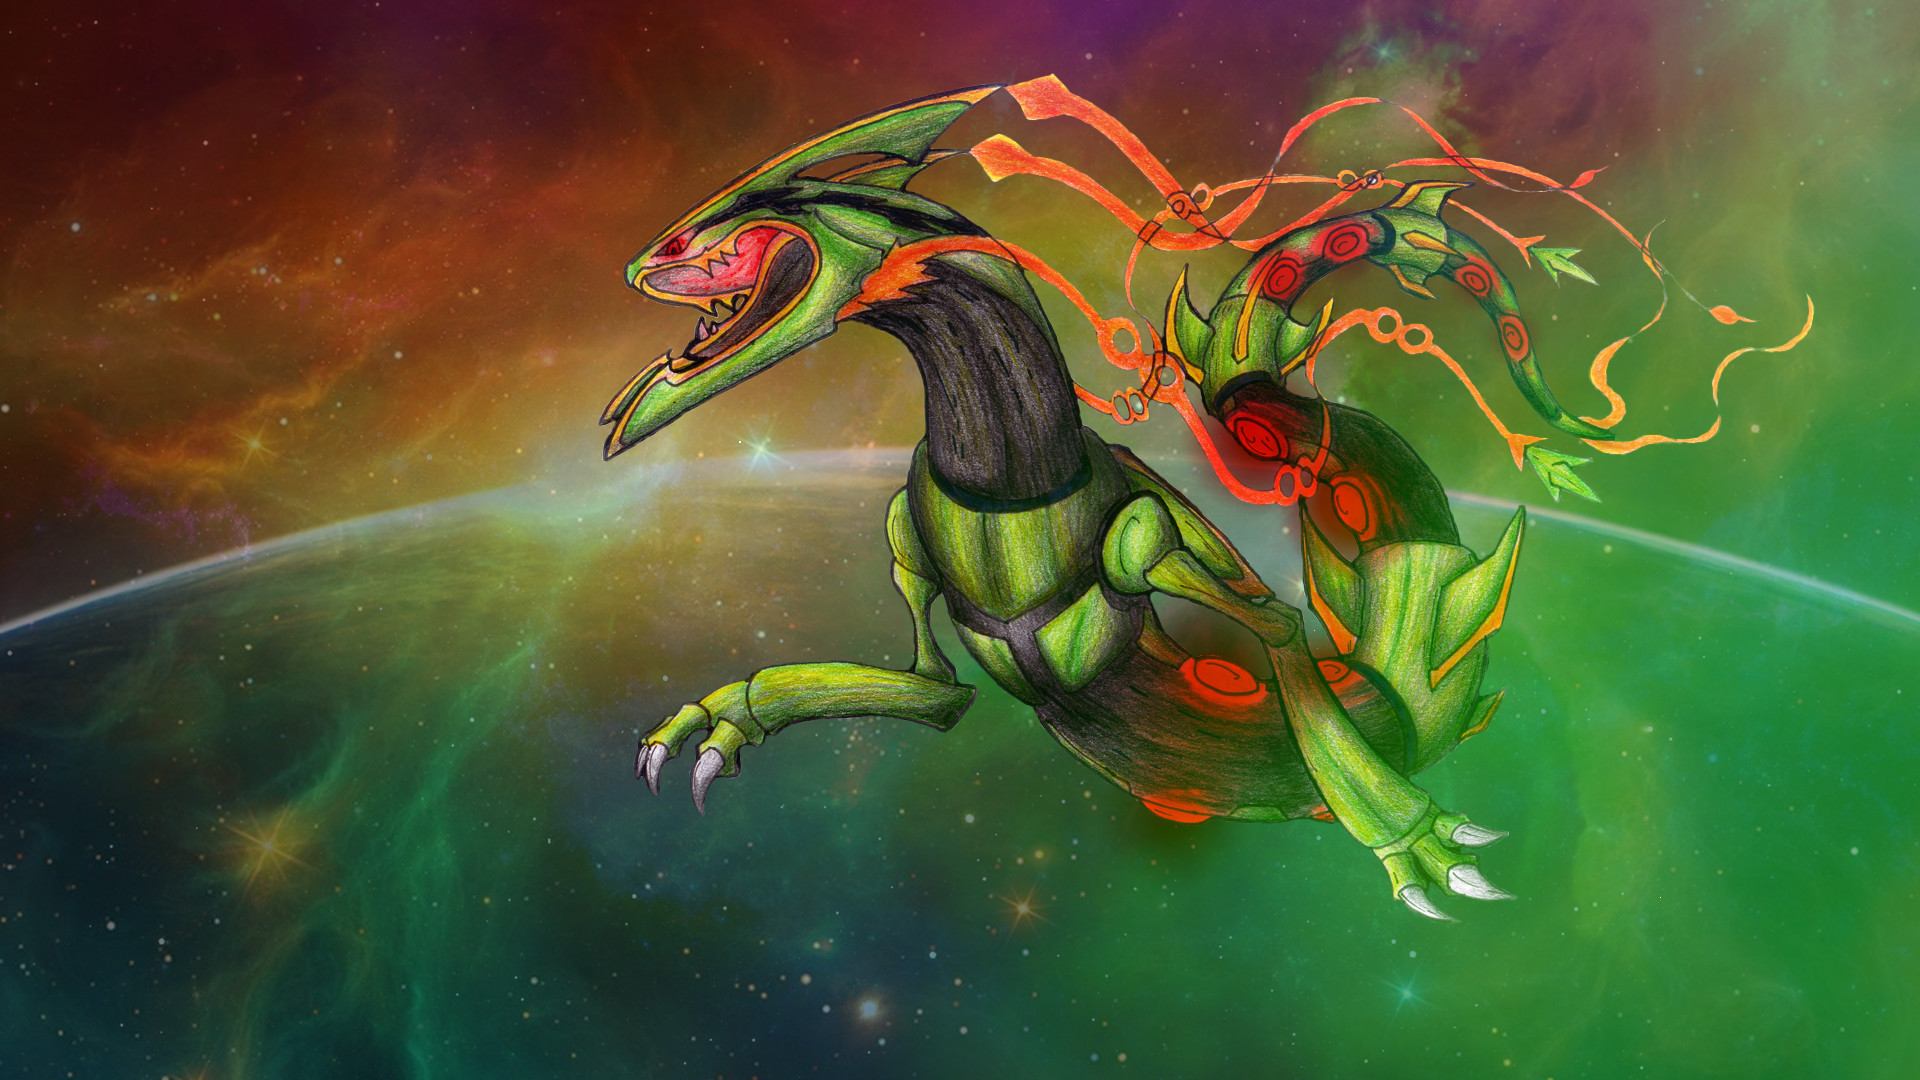 1920x1080 26 Rayquaza (Pokemon) HD Wallpapers | Backgrounds - Wallpaper Abyss